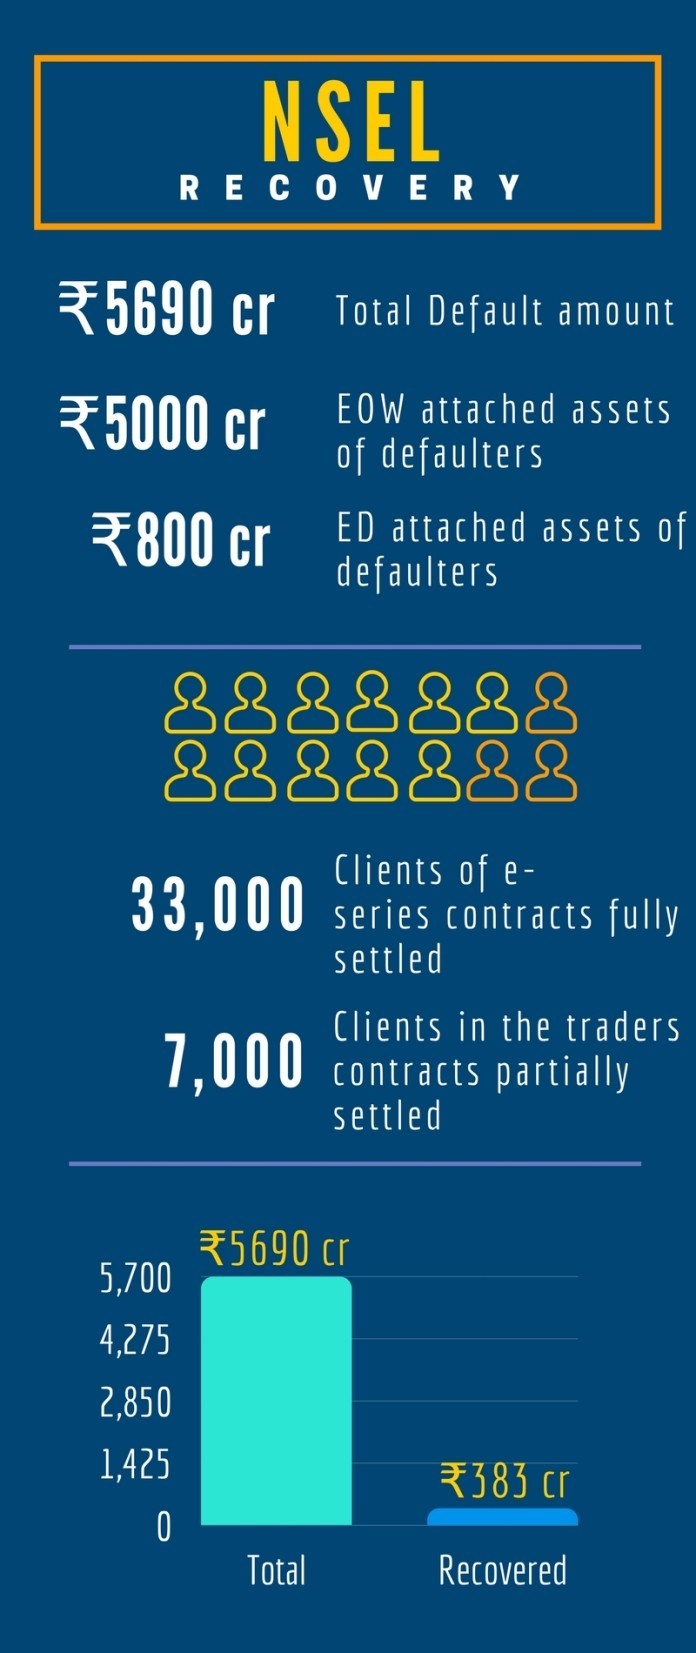 NSEL Recovery process